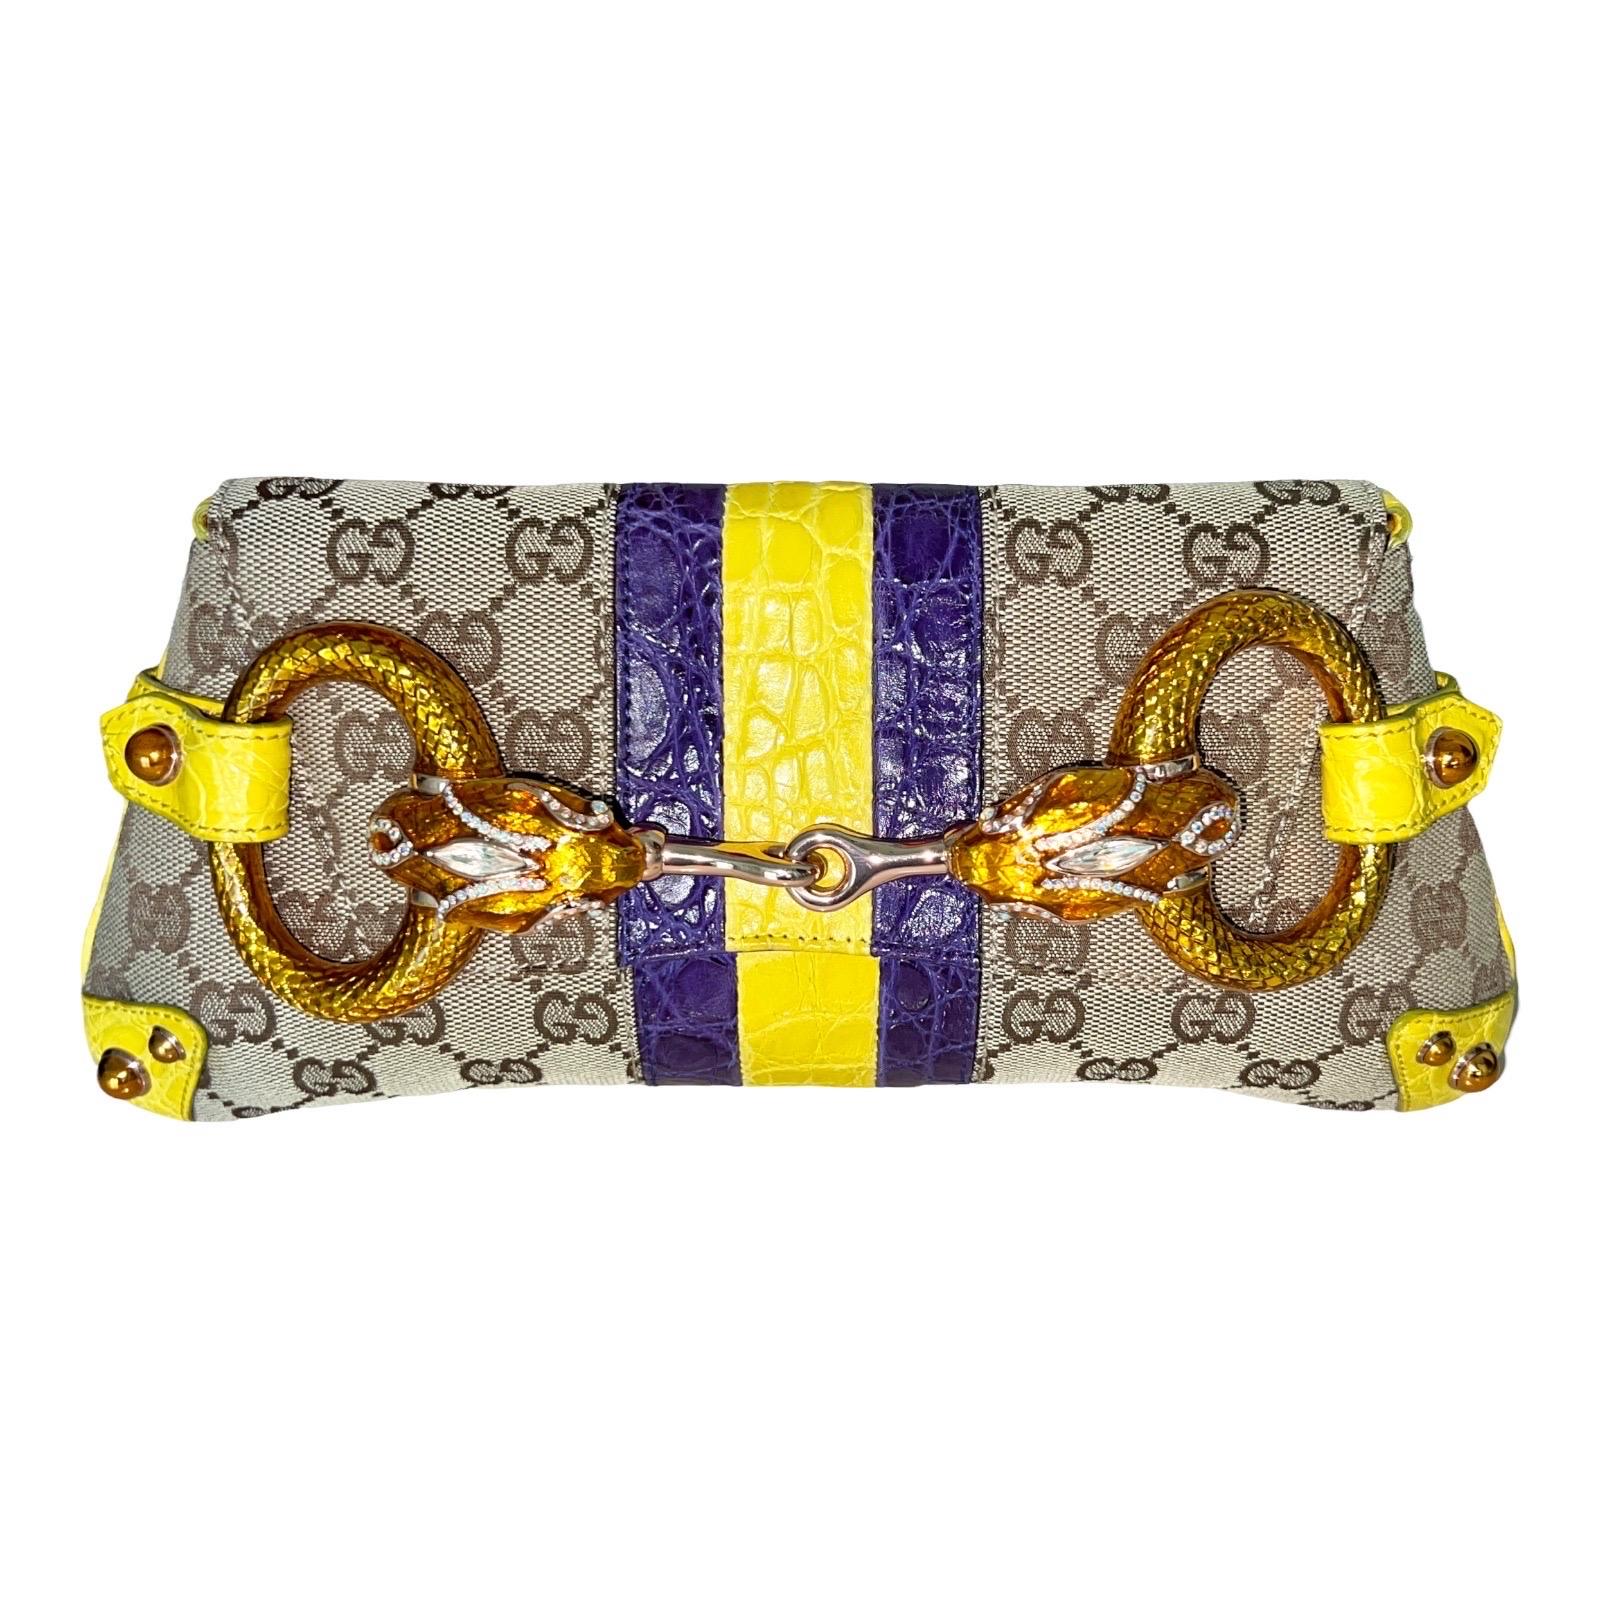 UNWORN Gucci by Tom Ford 2004 Exotic GG Monogram Jeweled Serpent Head Clutch Bag 5